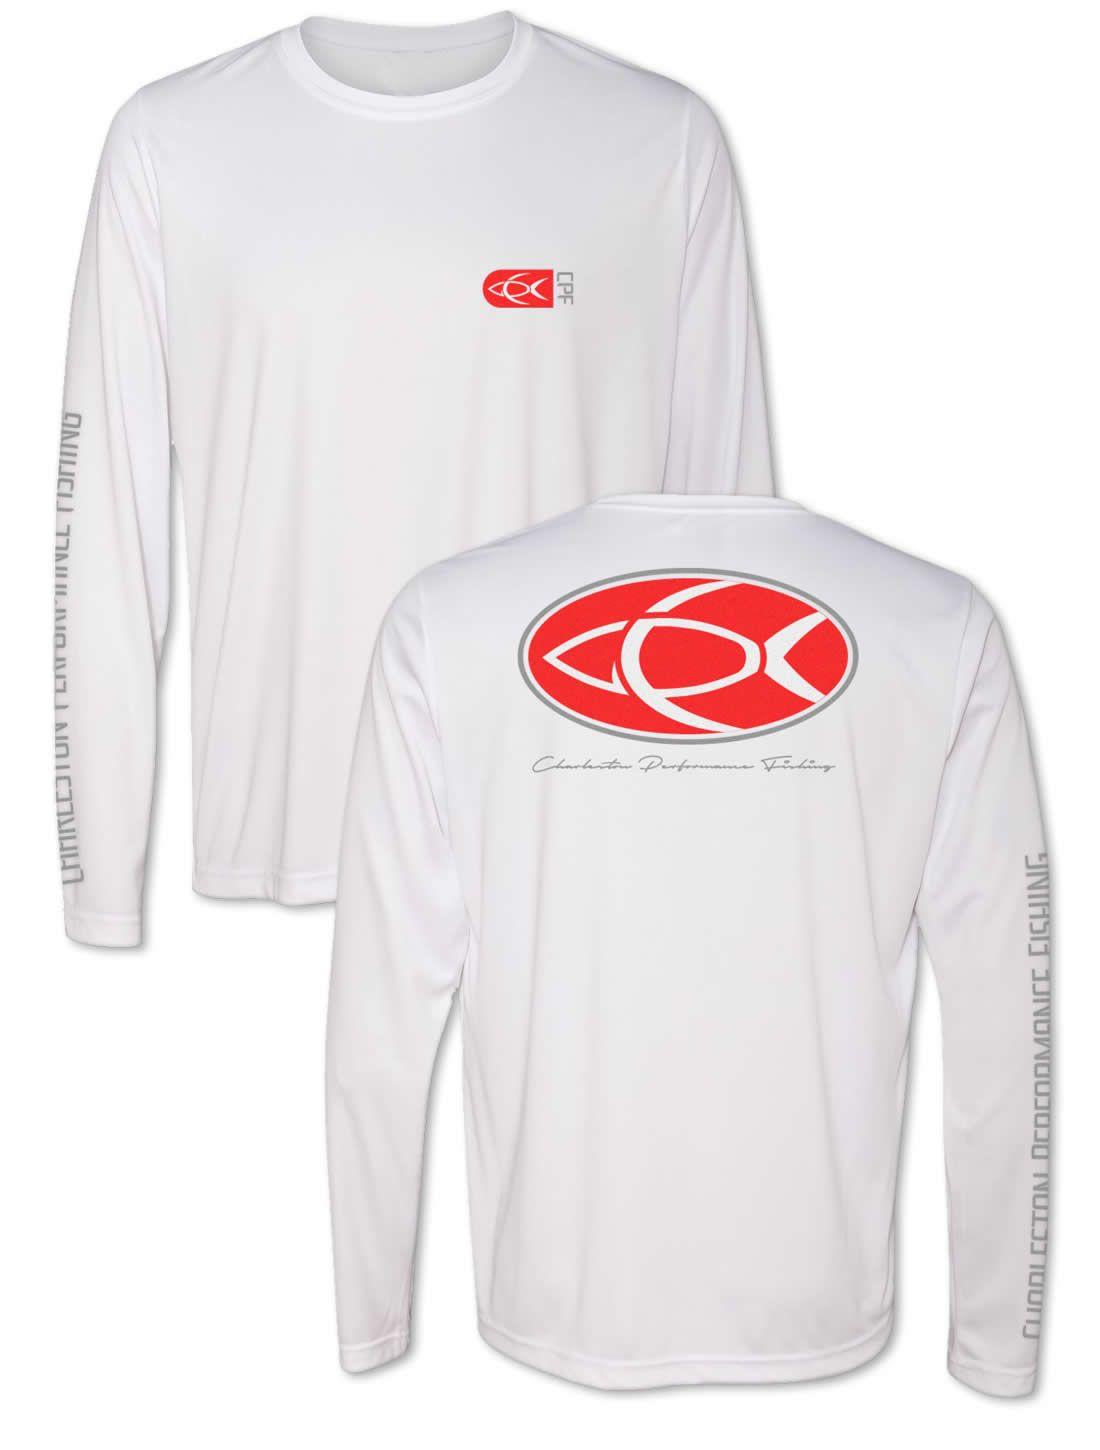 White and Red Oval Logo - Oval Fish Back Red Graphic White Long Sleeve Performance Fishing